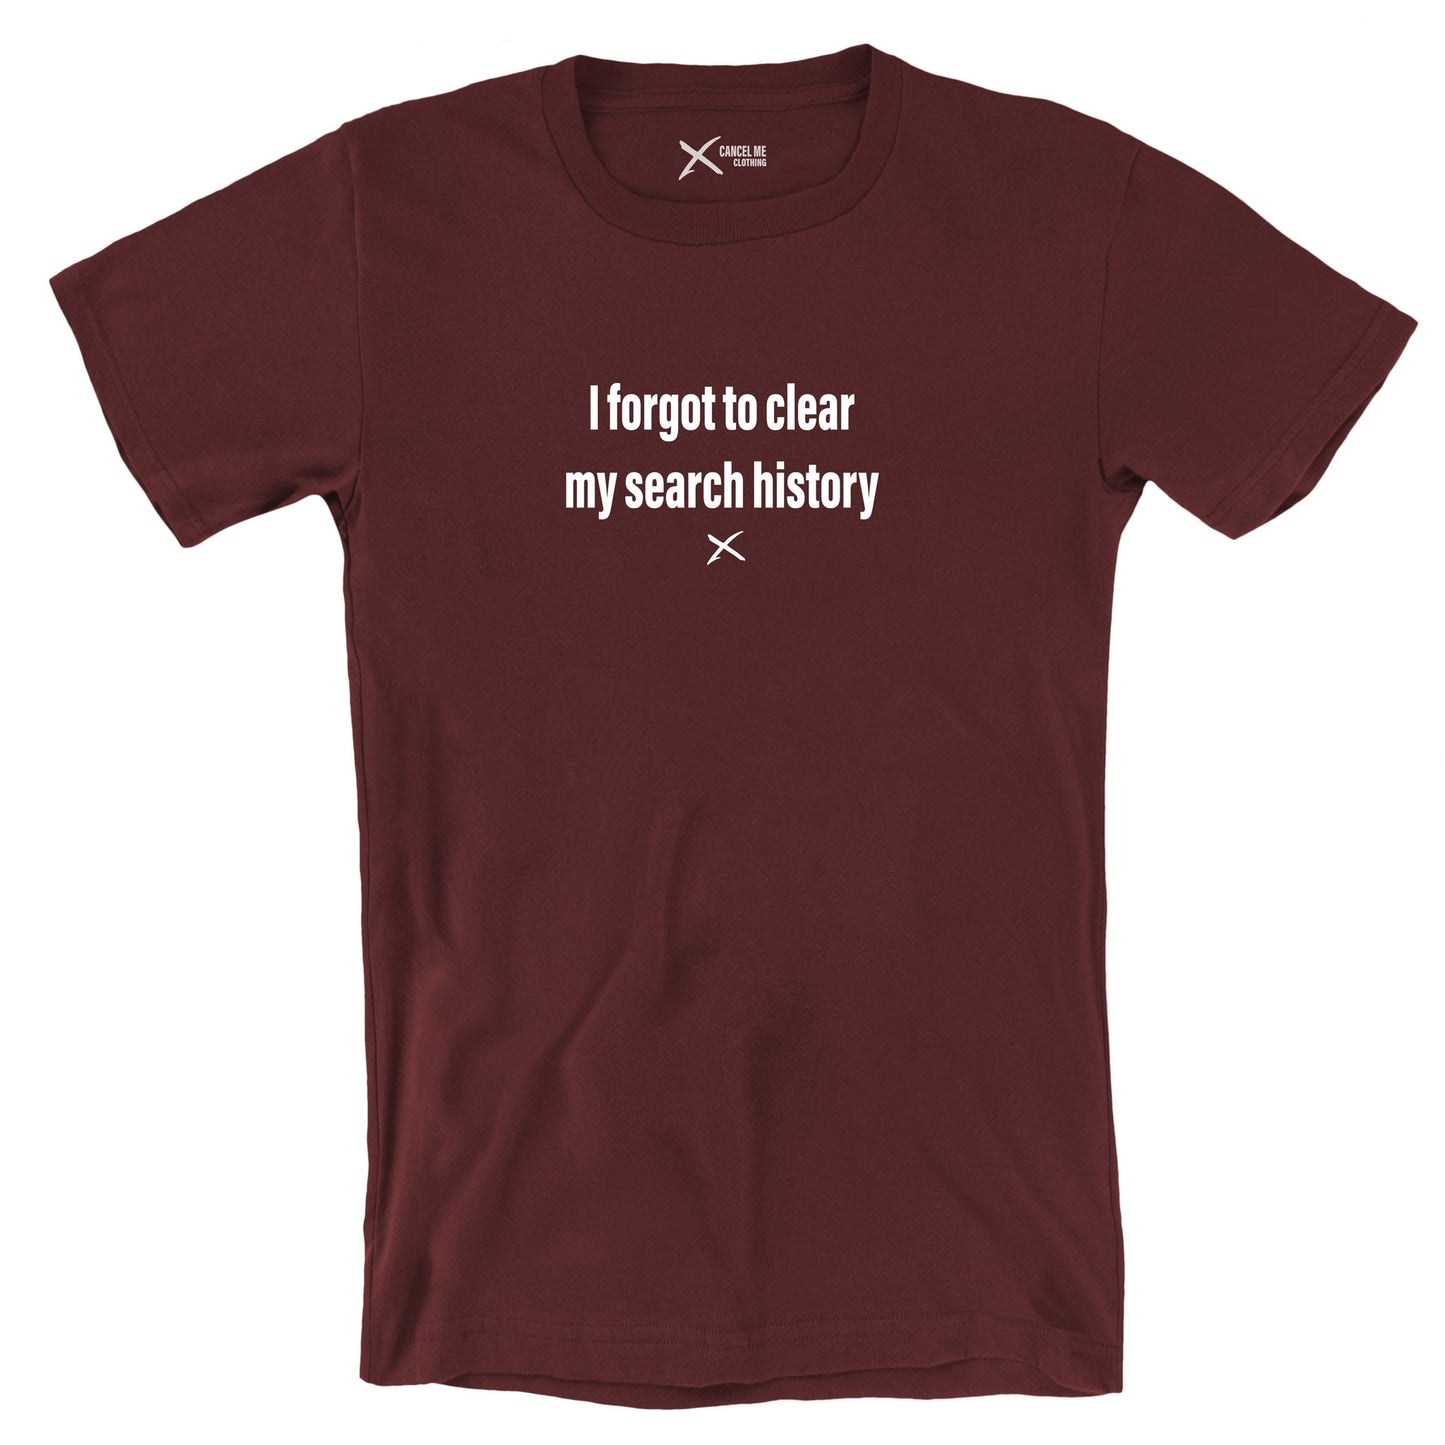 I forgot to clear my search history - Shirt